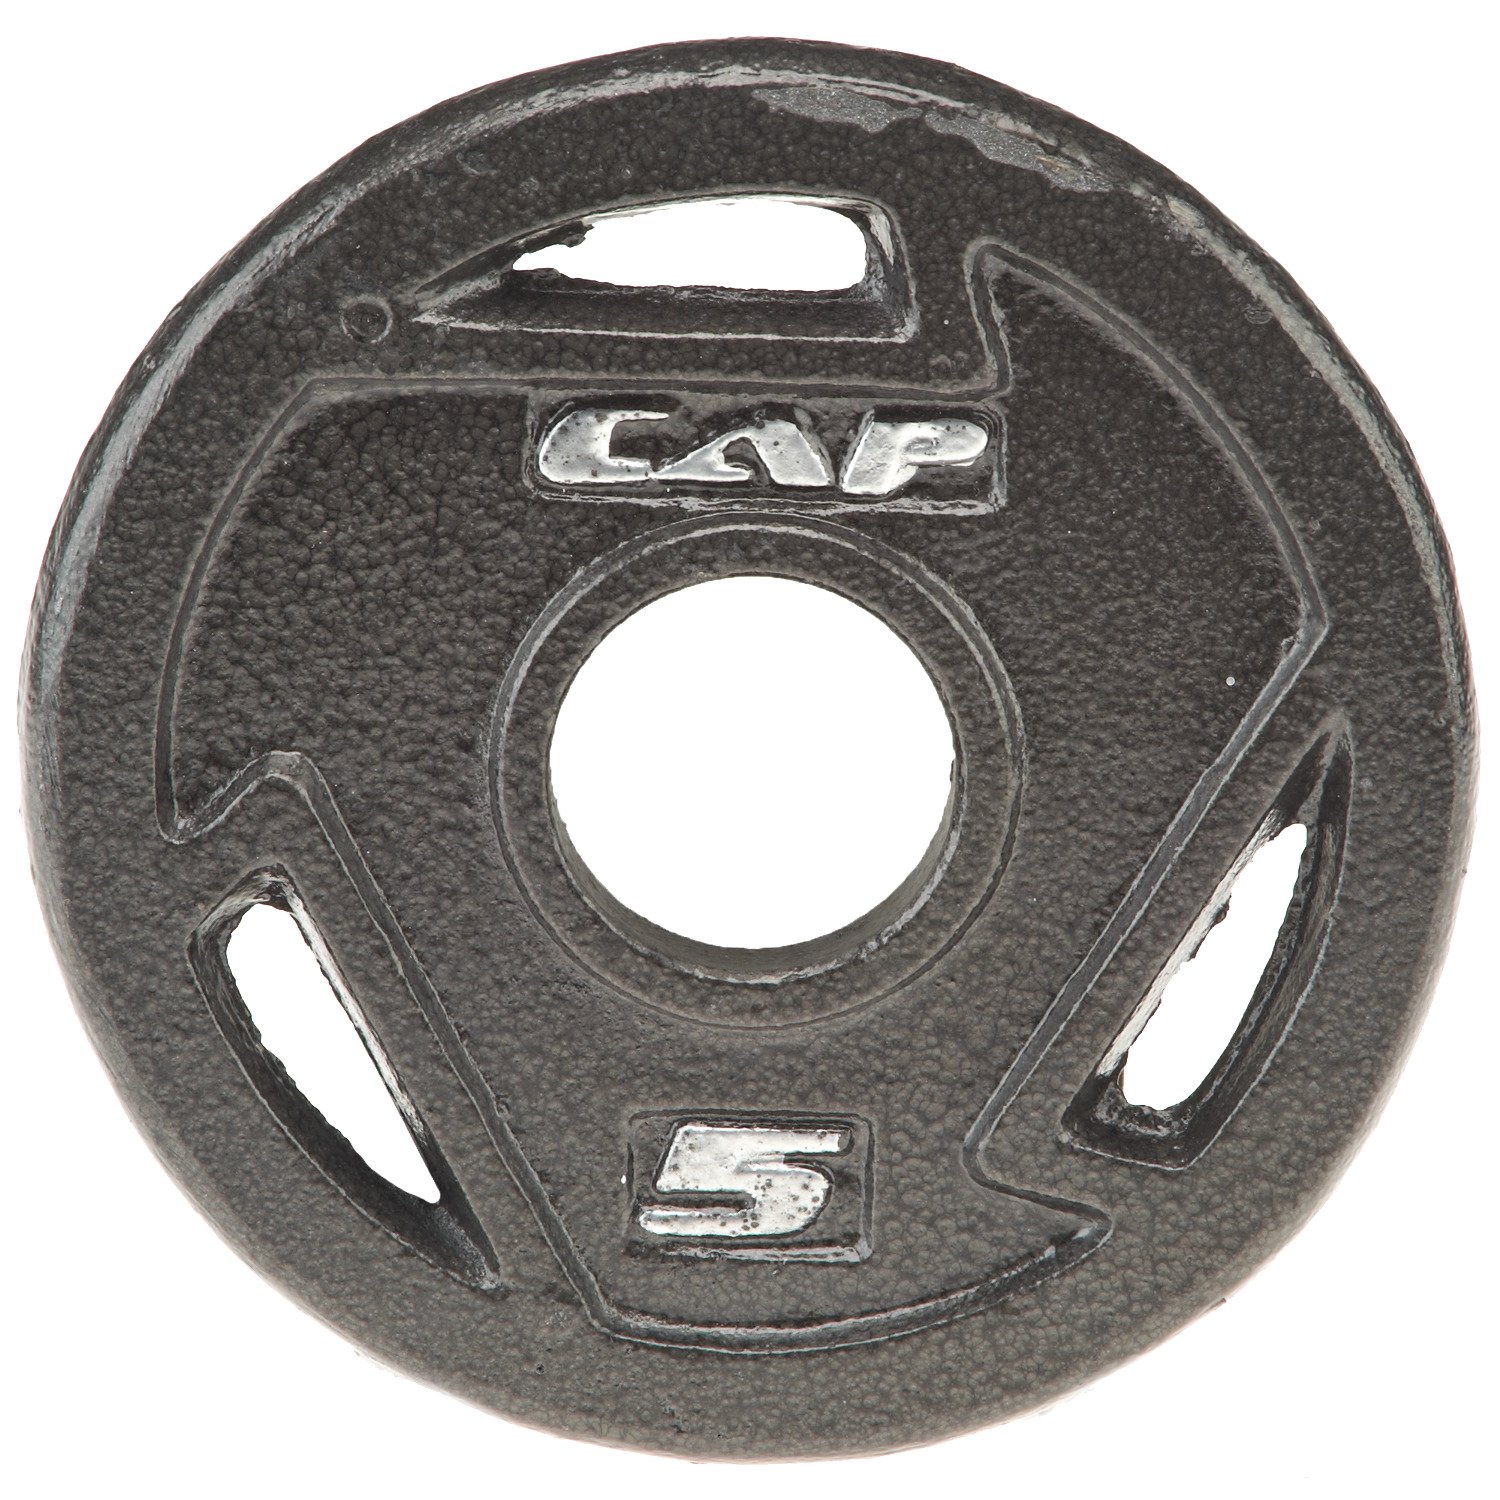  CAP Barbell 2-Inch Olympic Grip Weight Plate, 10 lb